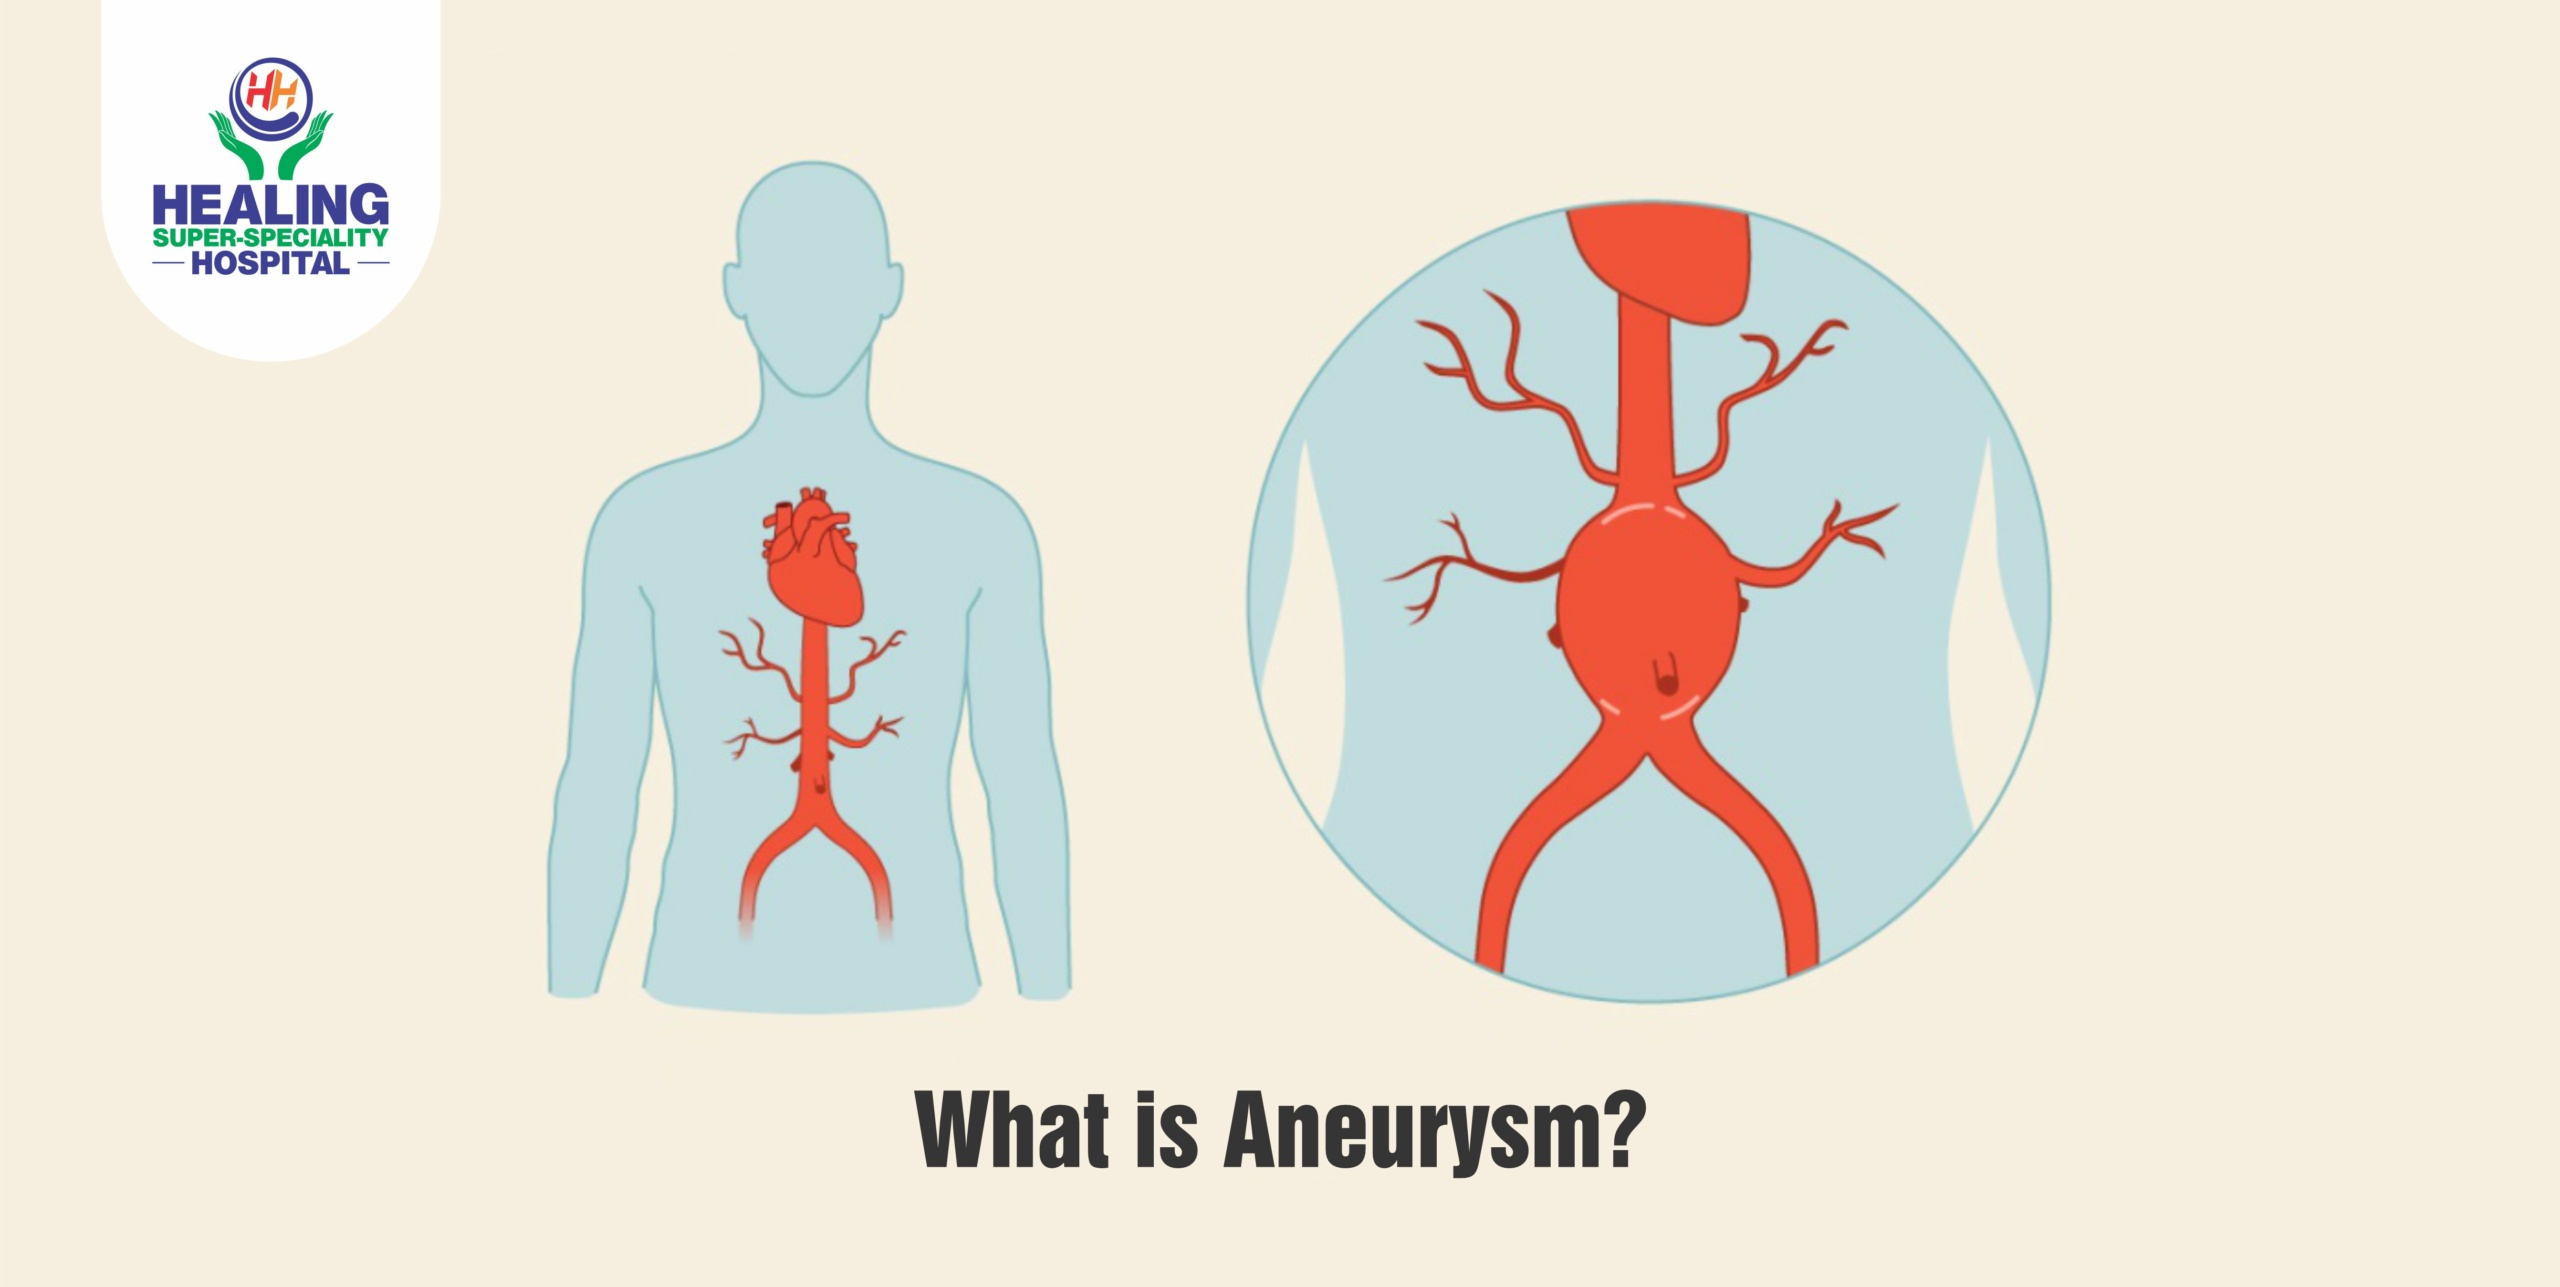 What is Aneurysm?